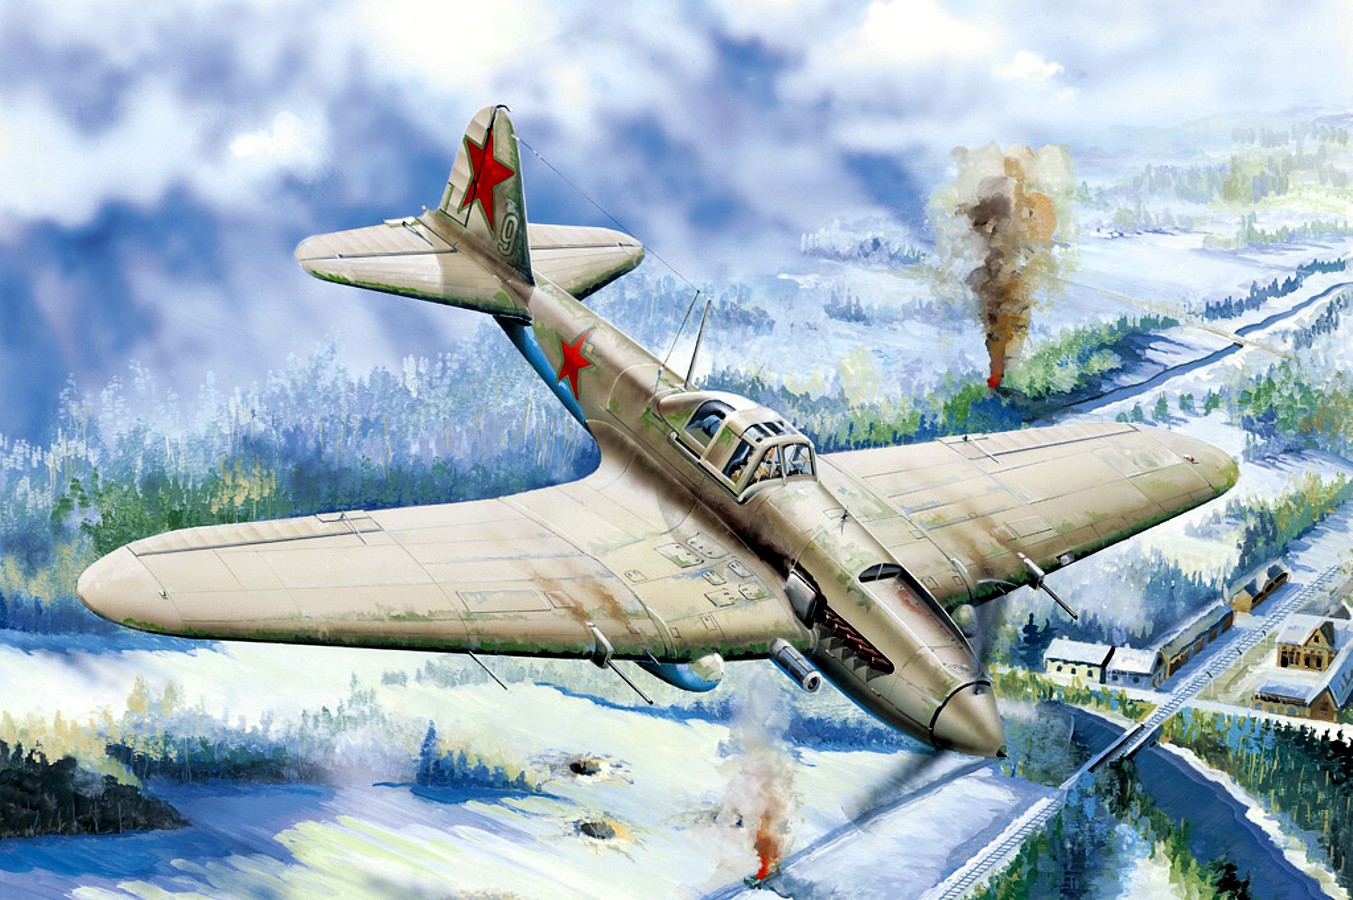 Il-2 making a diving attack.